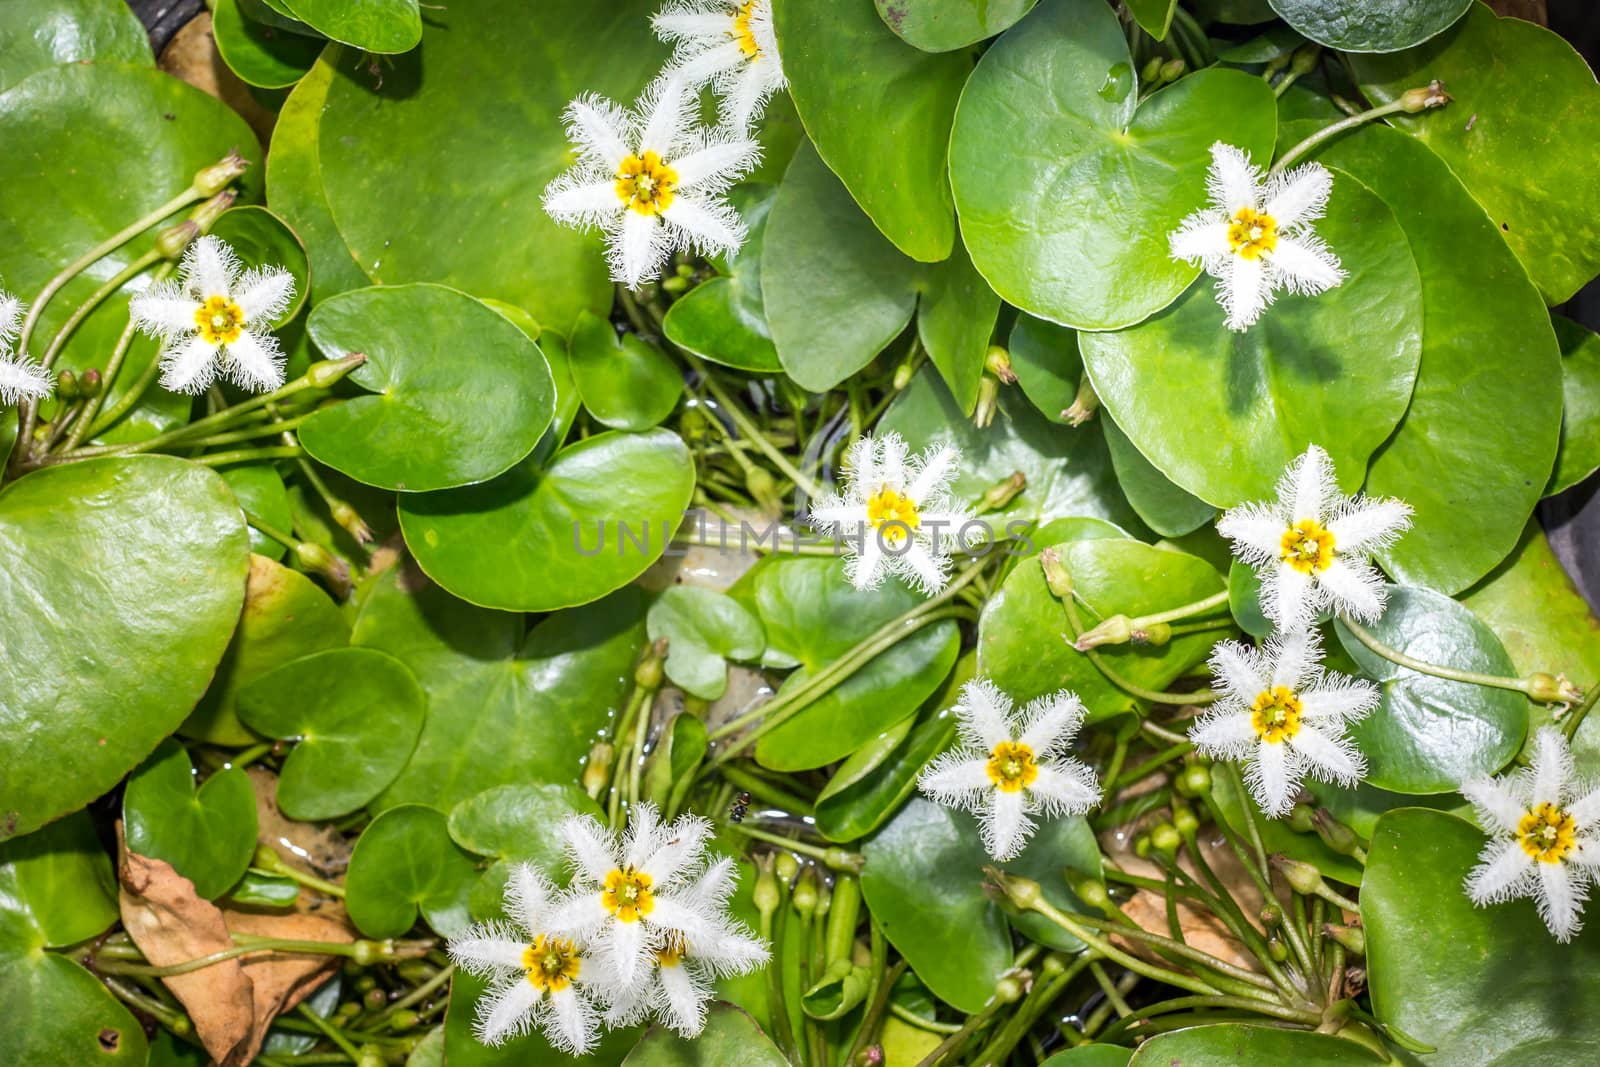 Water Snowflake or Nymphoides indica by 9Chai